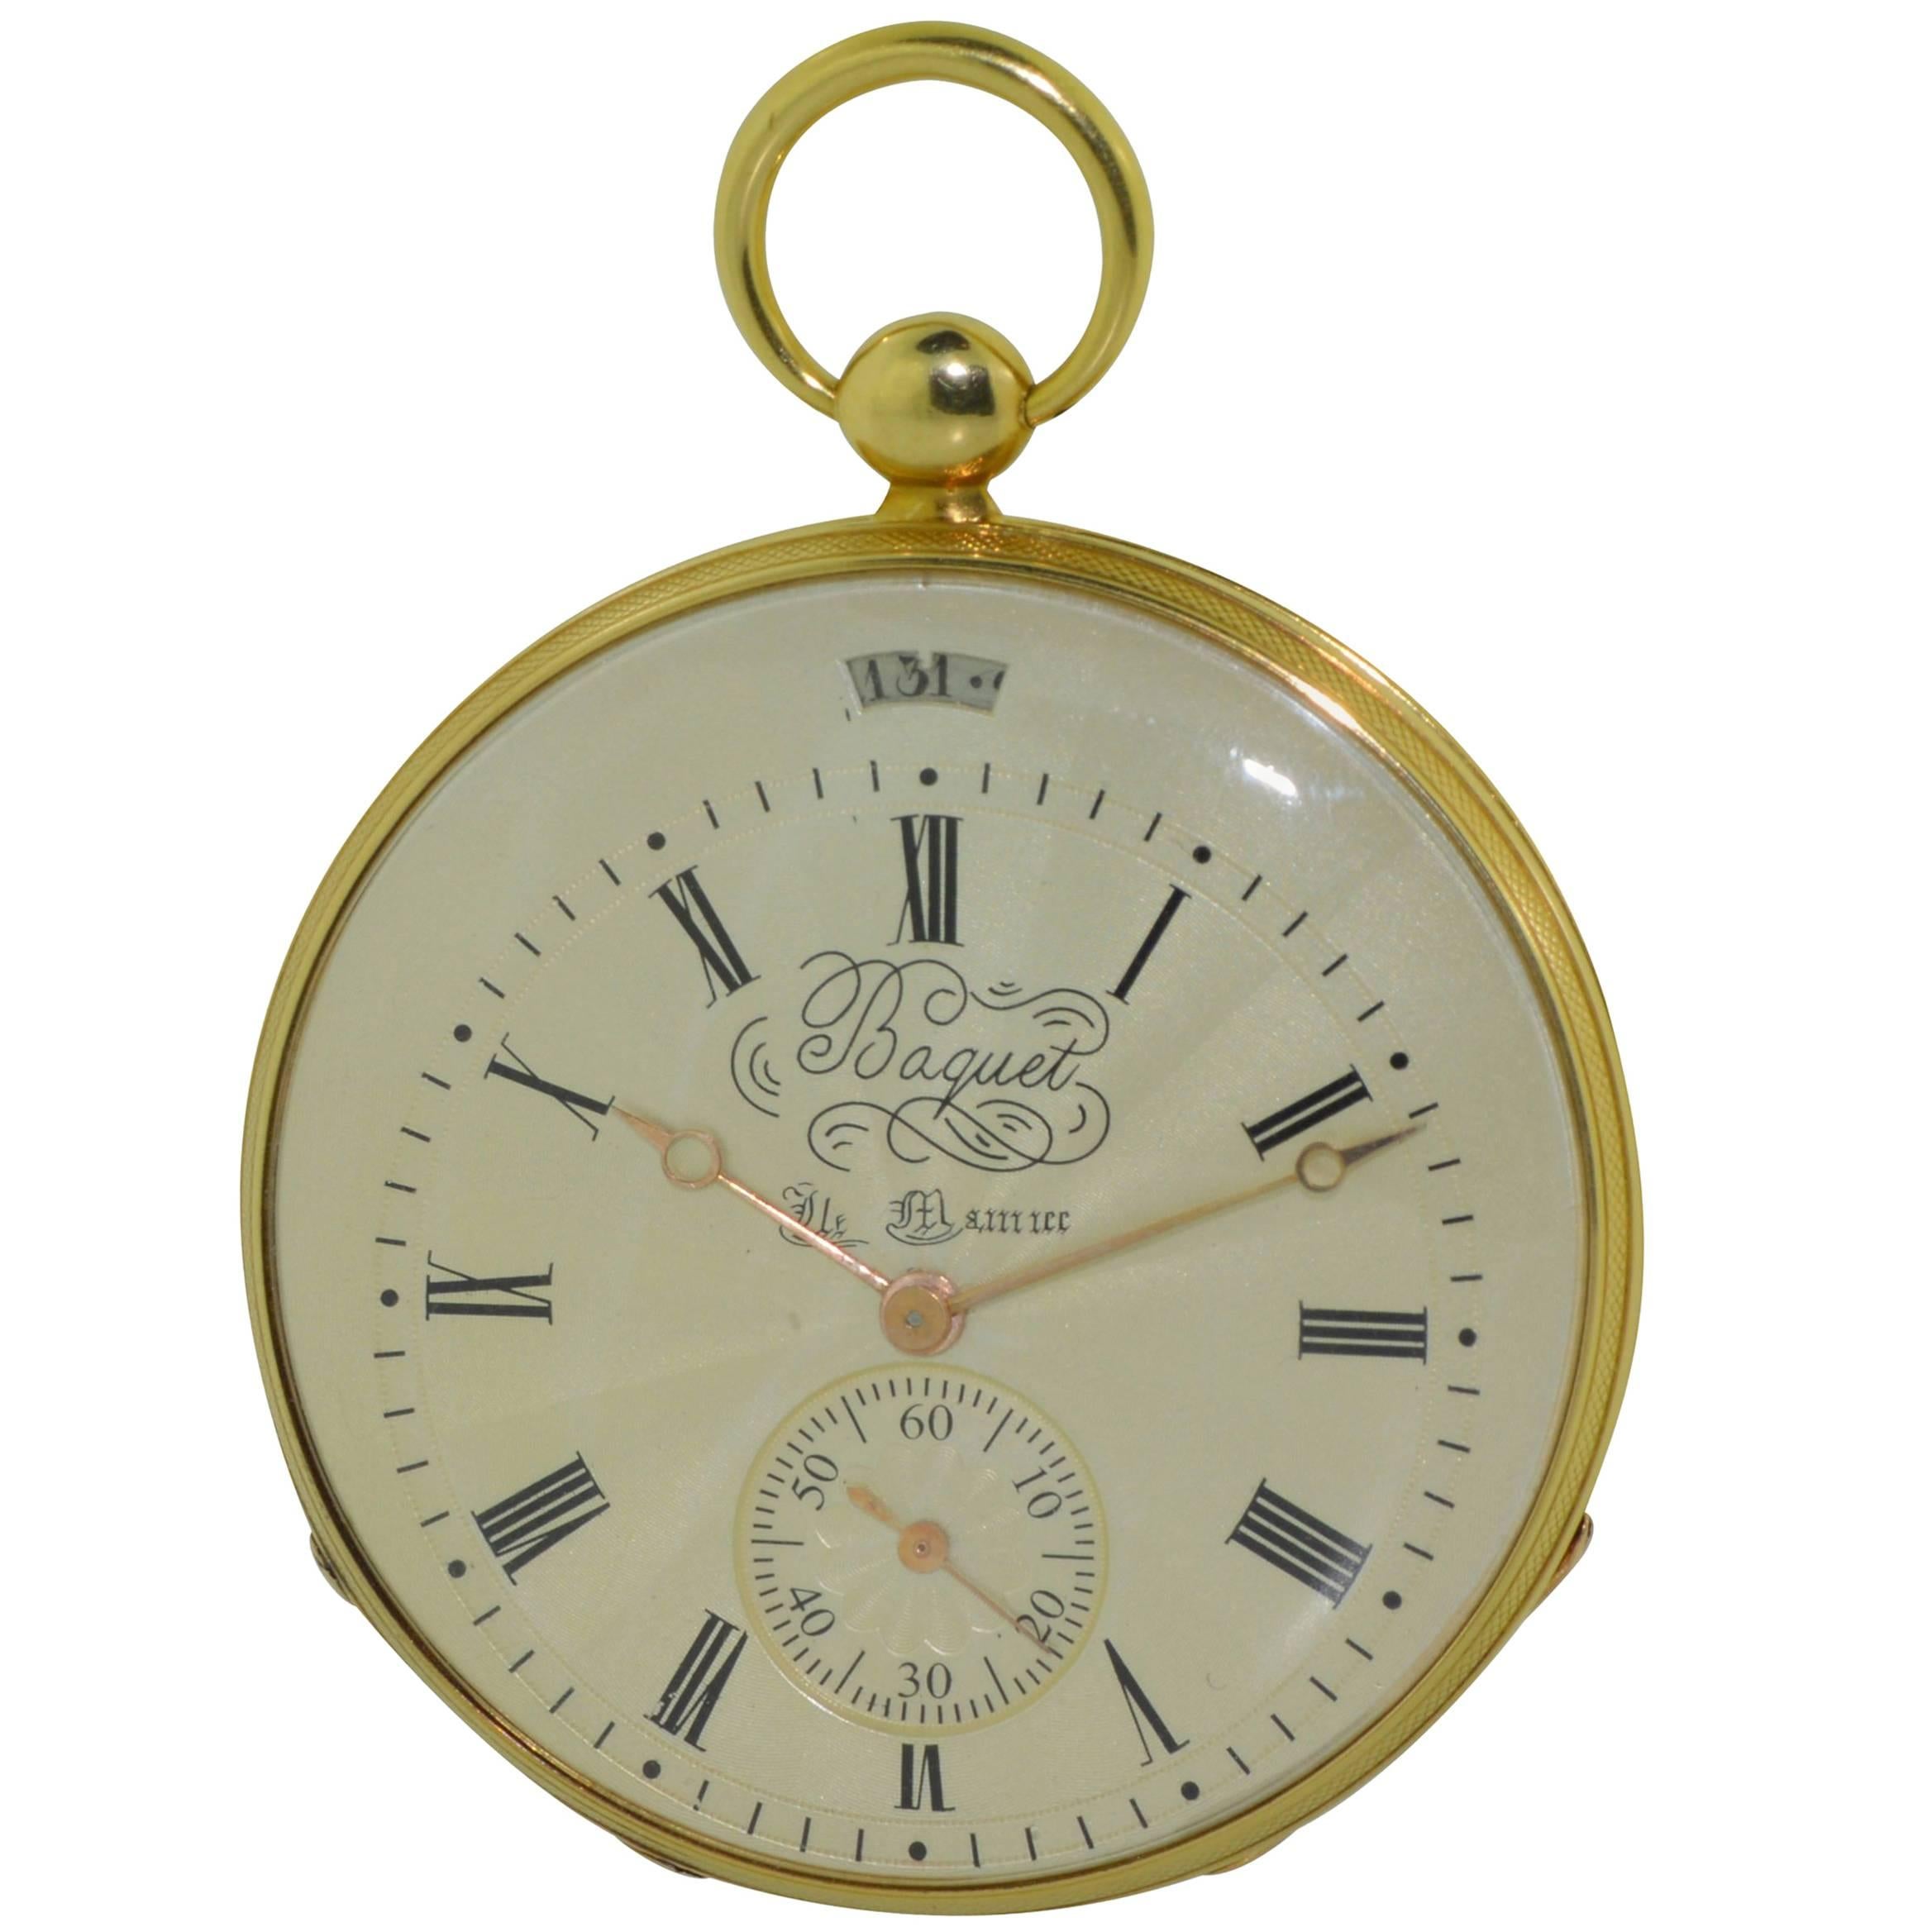 FACTORY / HOUSE: Baquet Keywind Switzerland 
STYLE / REFERENCE: Open Faced Calendar Pocket Watch
METAL / MATERIAL: 18 Kt. Yellow Gold
DIMENSIONS: Diameter 47mm 
CIRCA: 1820's
MOVEMENT / CALIBER: Cylindrical Escapement 
DIAL / HANDS: Breguet Engine